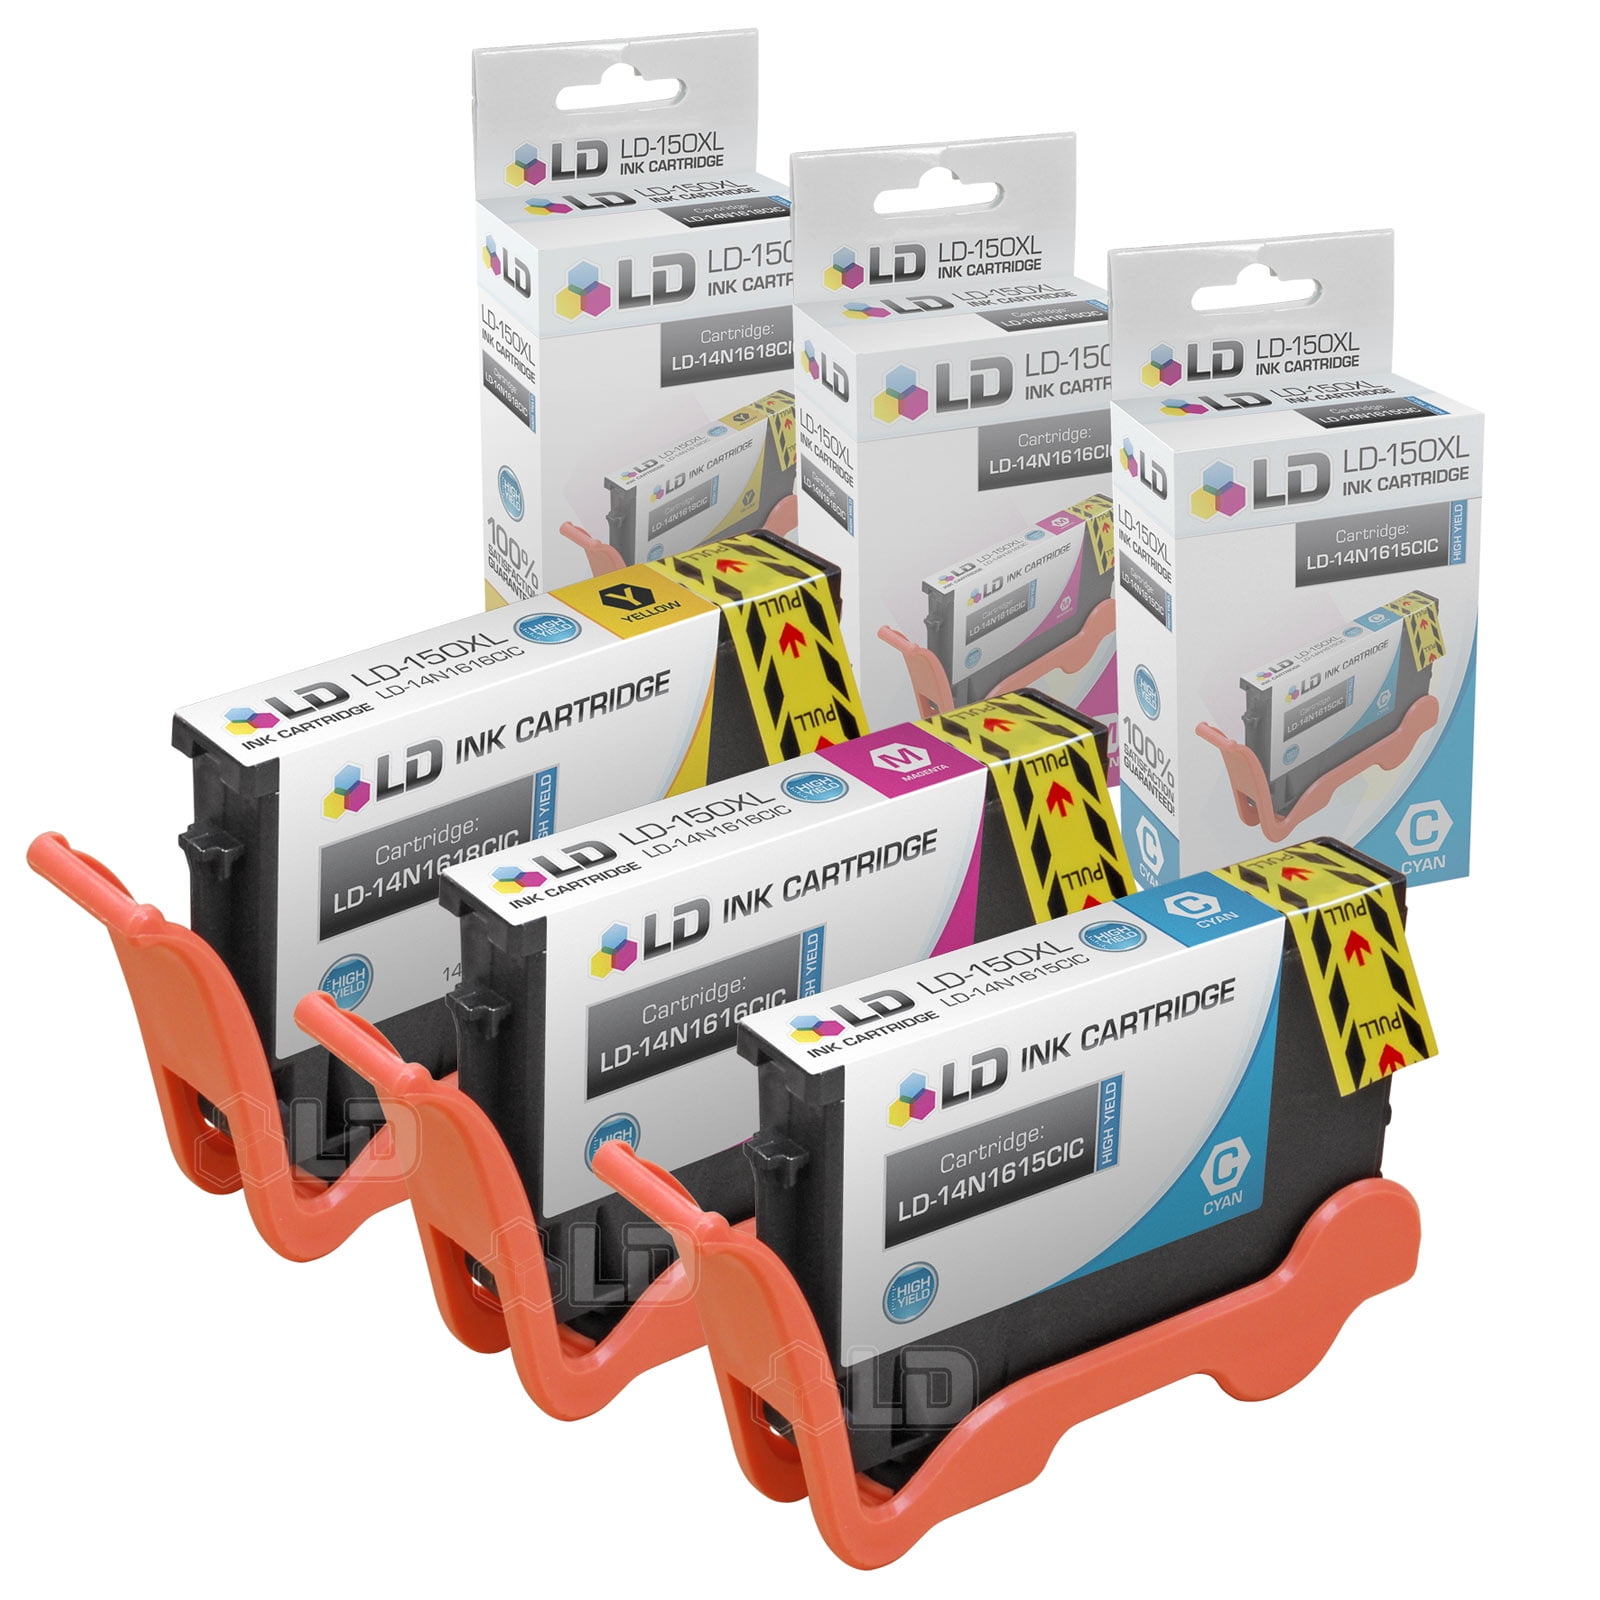 10x NoN-OEM 150XL Ink Cartridge for Lexmark Pro715 Pro915 S315 S415 S515 